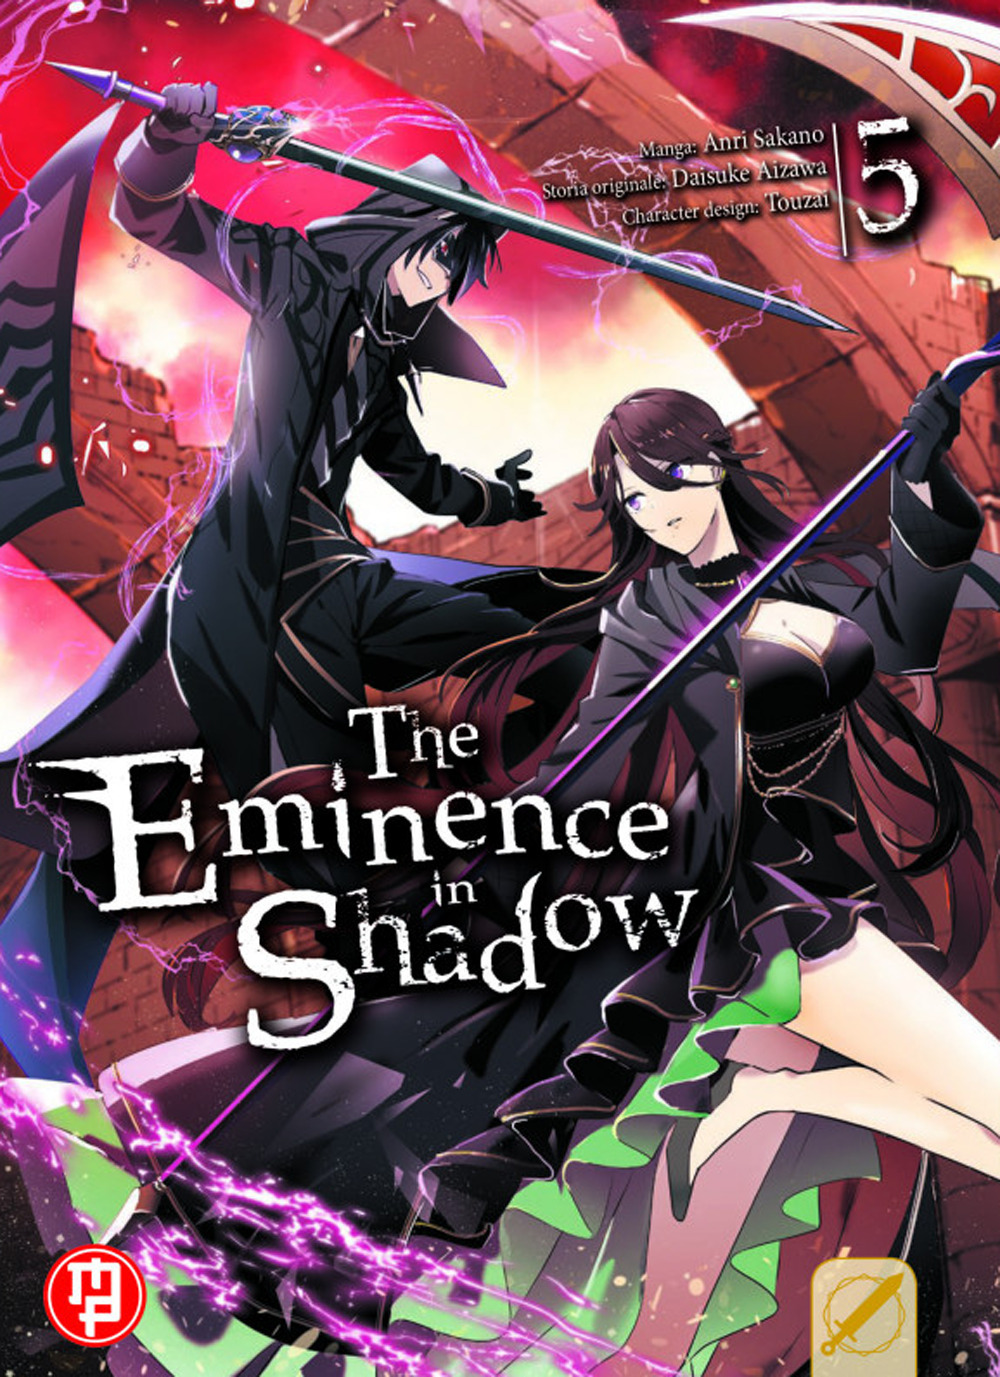 The eminence in shadow. Vol. 5